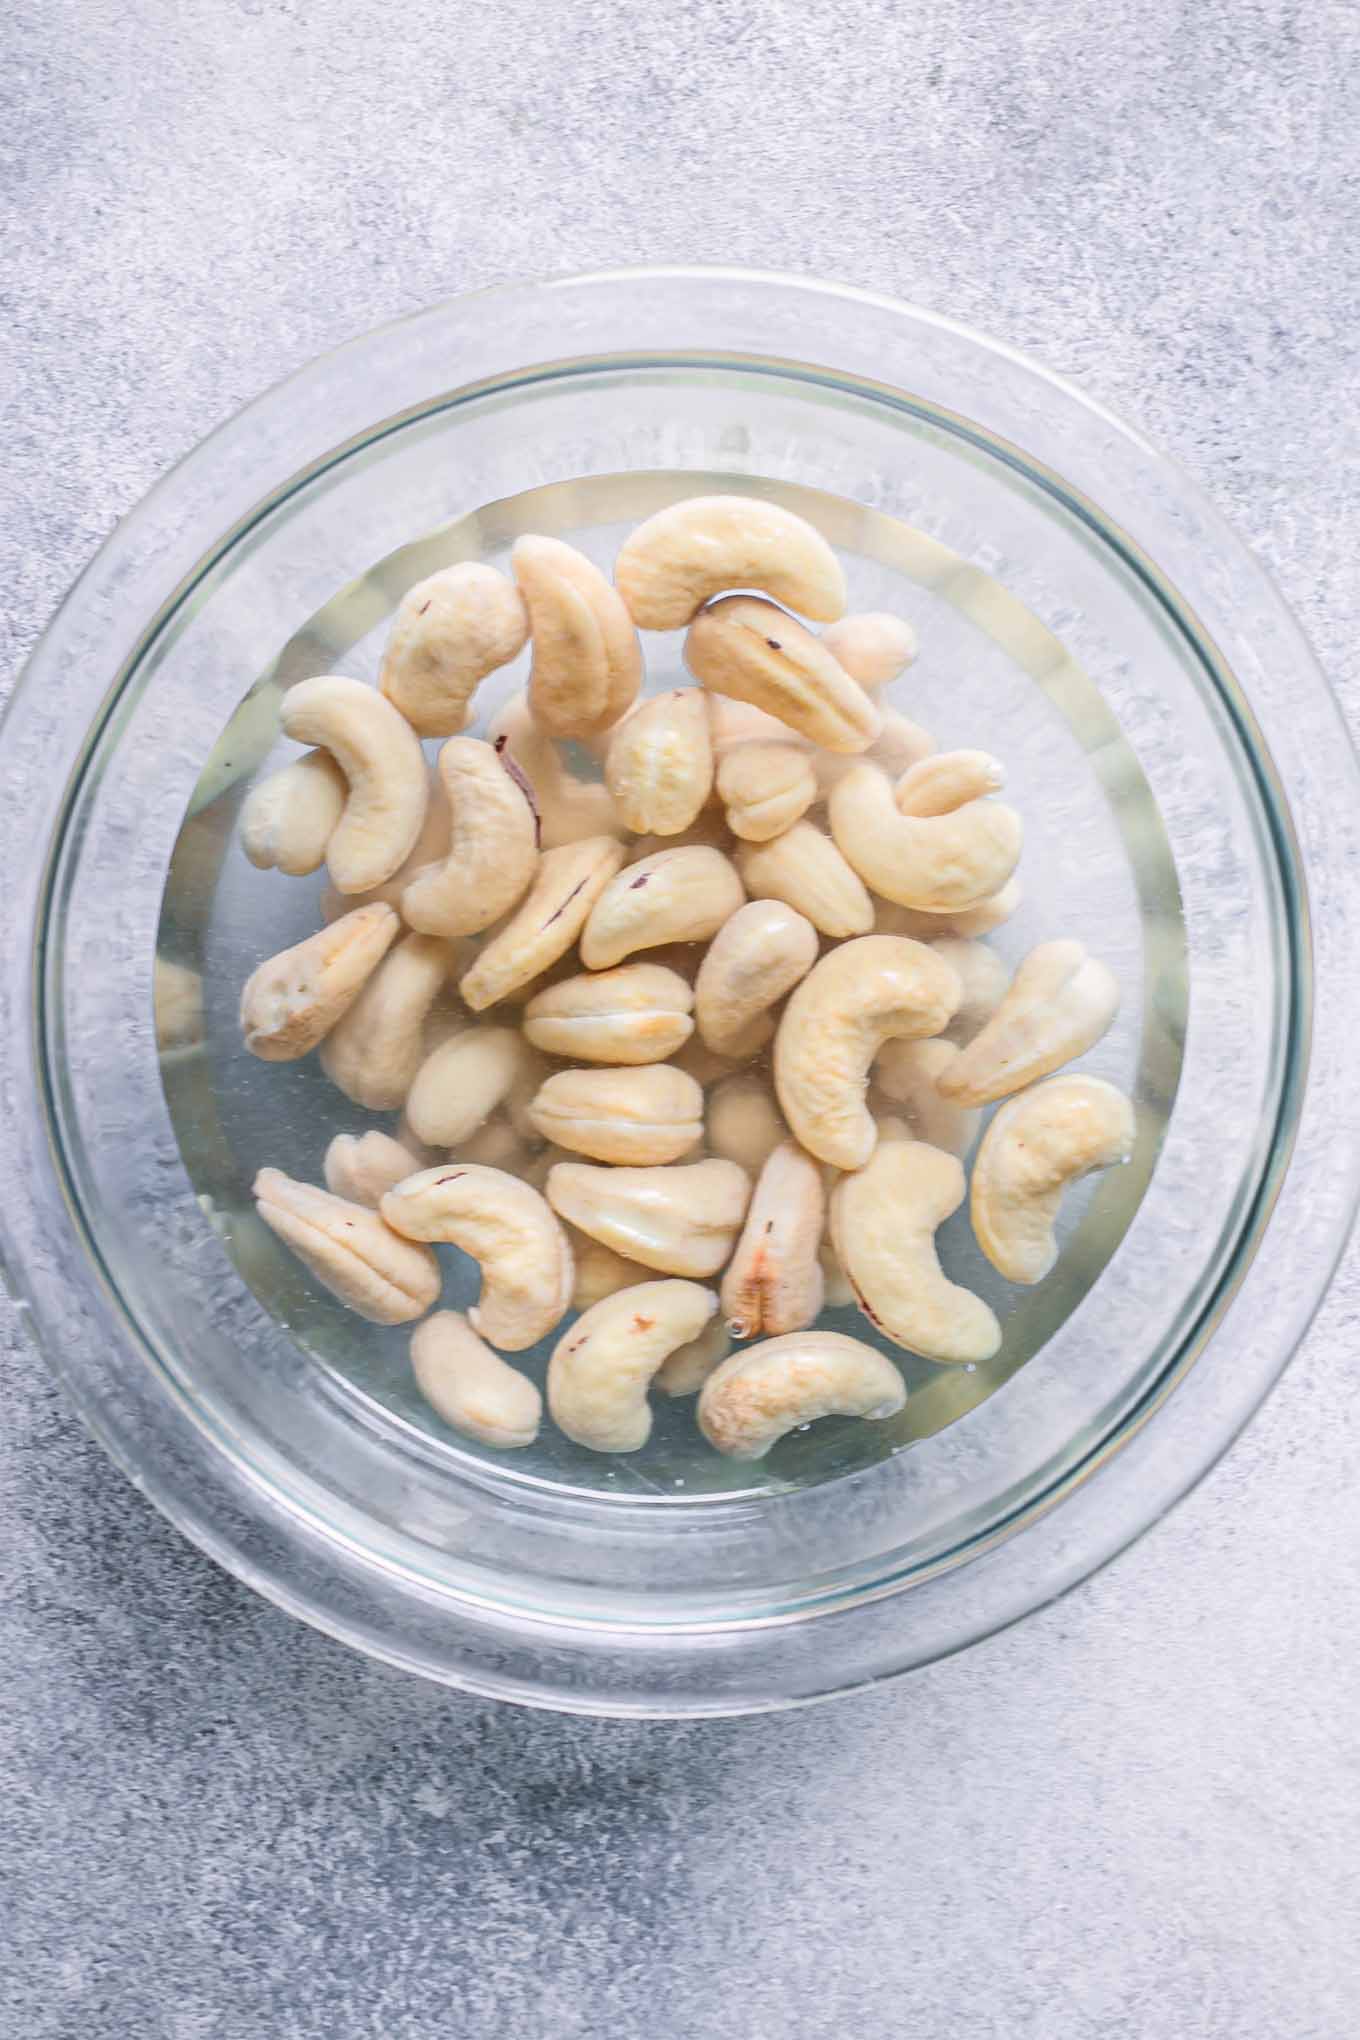 a glass mixing bowl with cashews soaking in hot water on a blue table